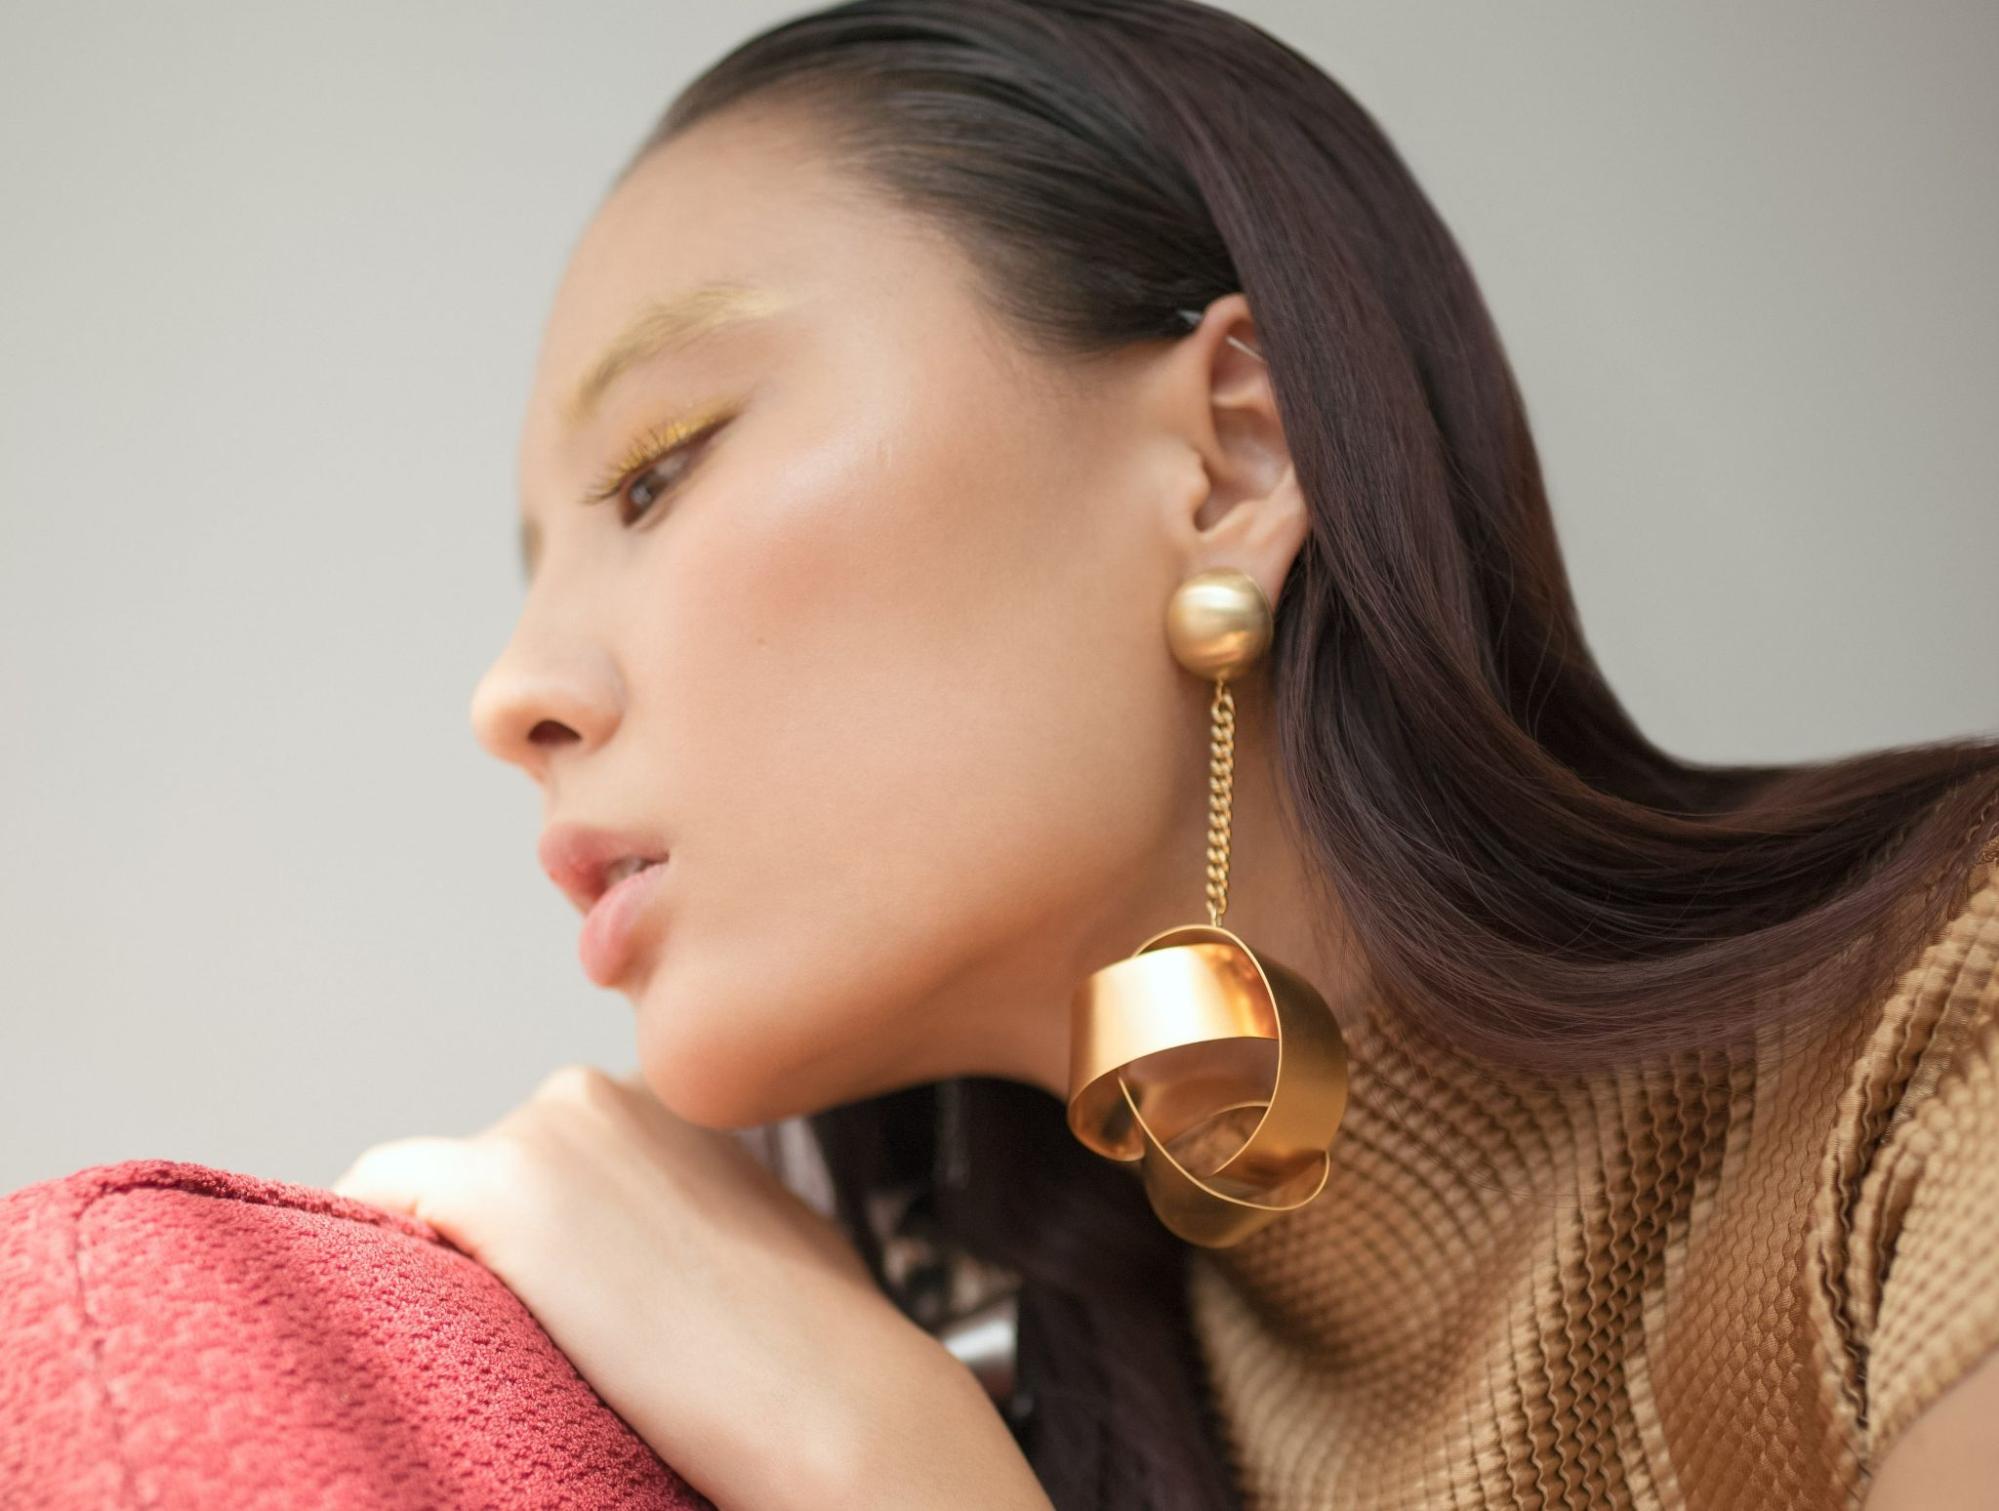 A woman wearing a dramatic drop earring leans on a red couch.